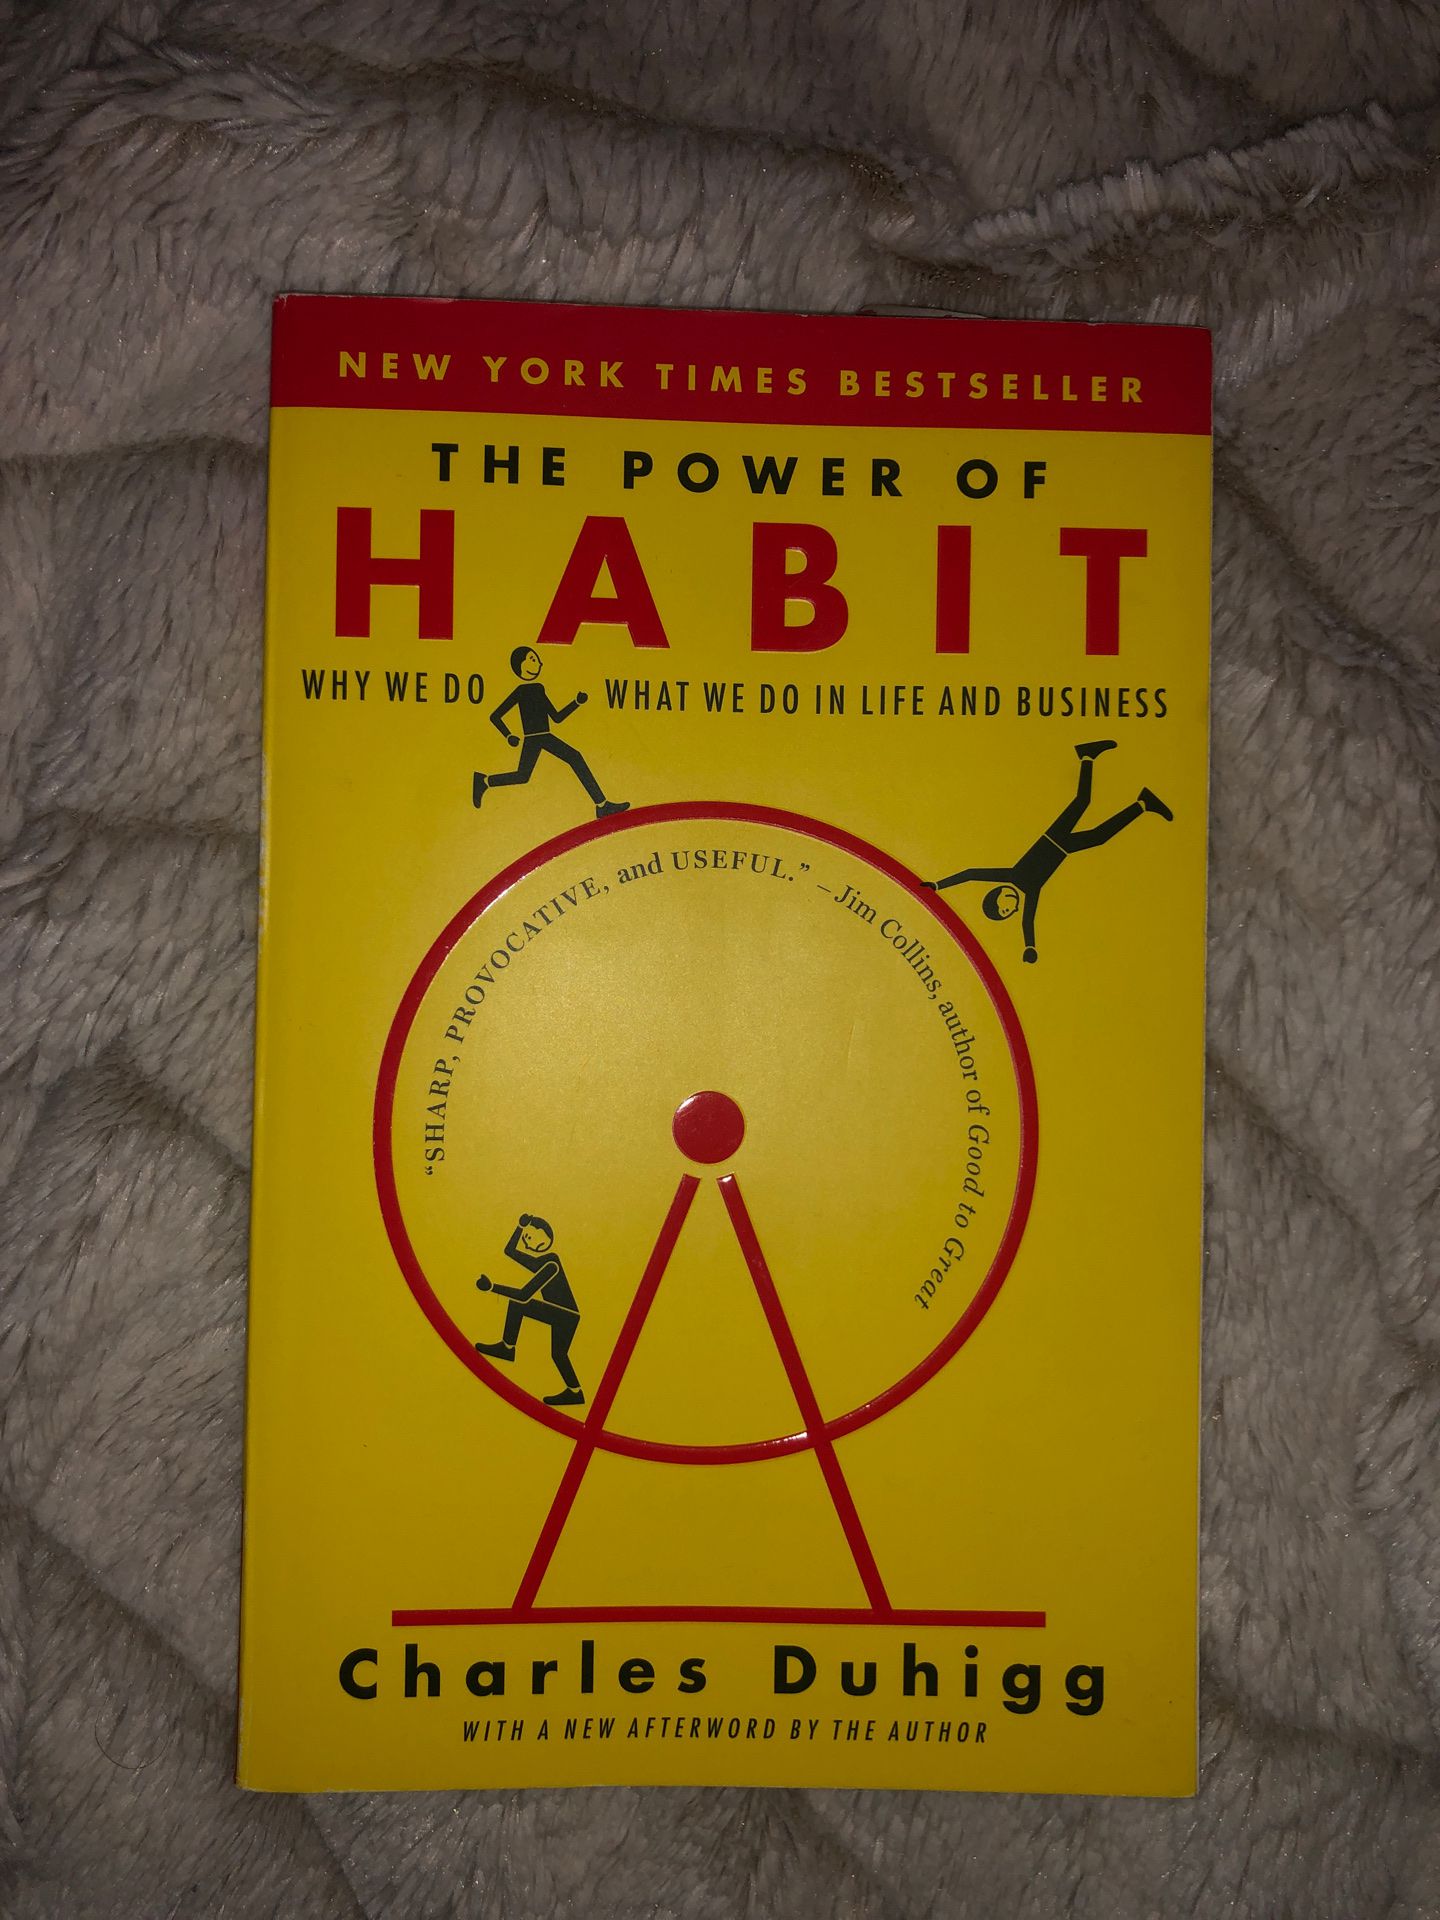 The Power of Habits - Charles Duhigg